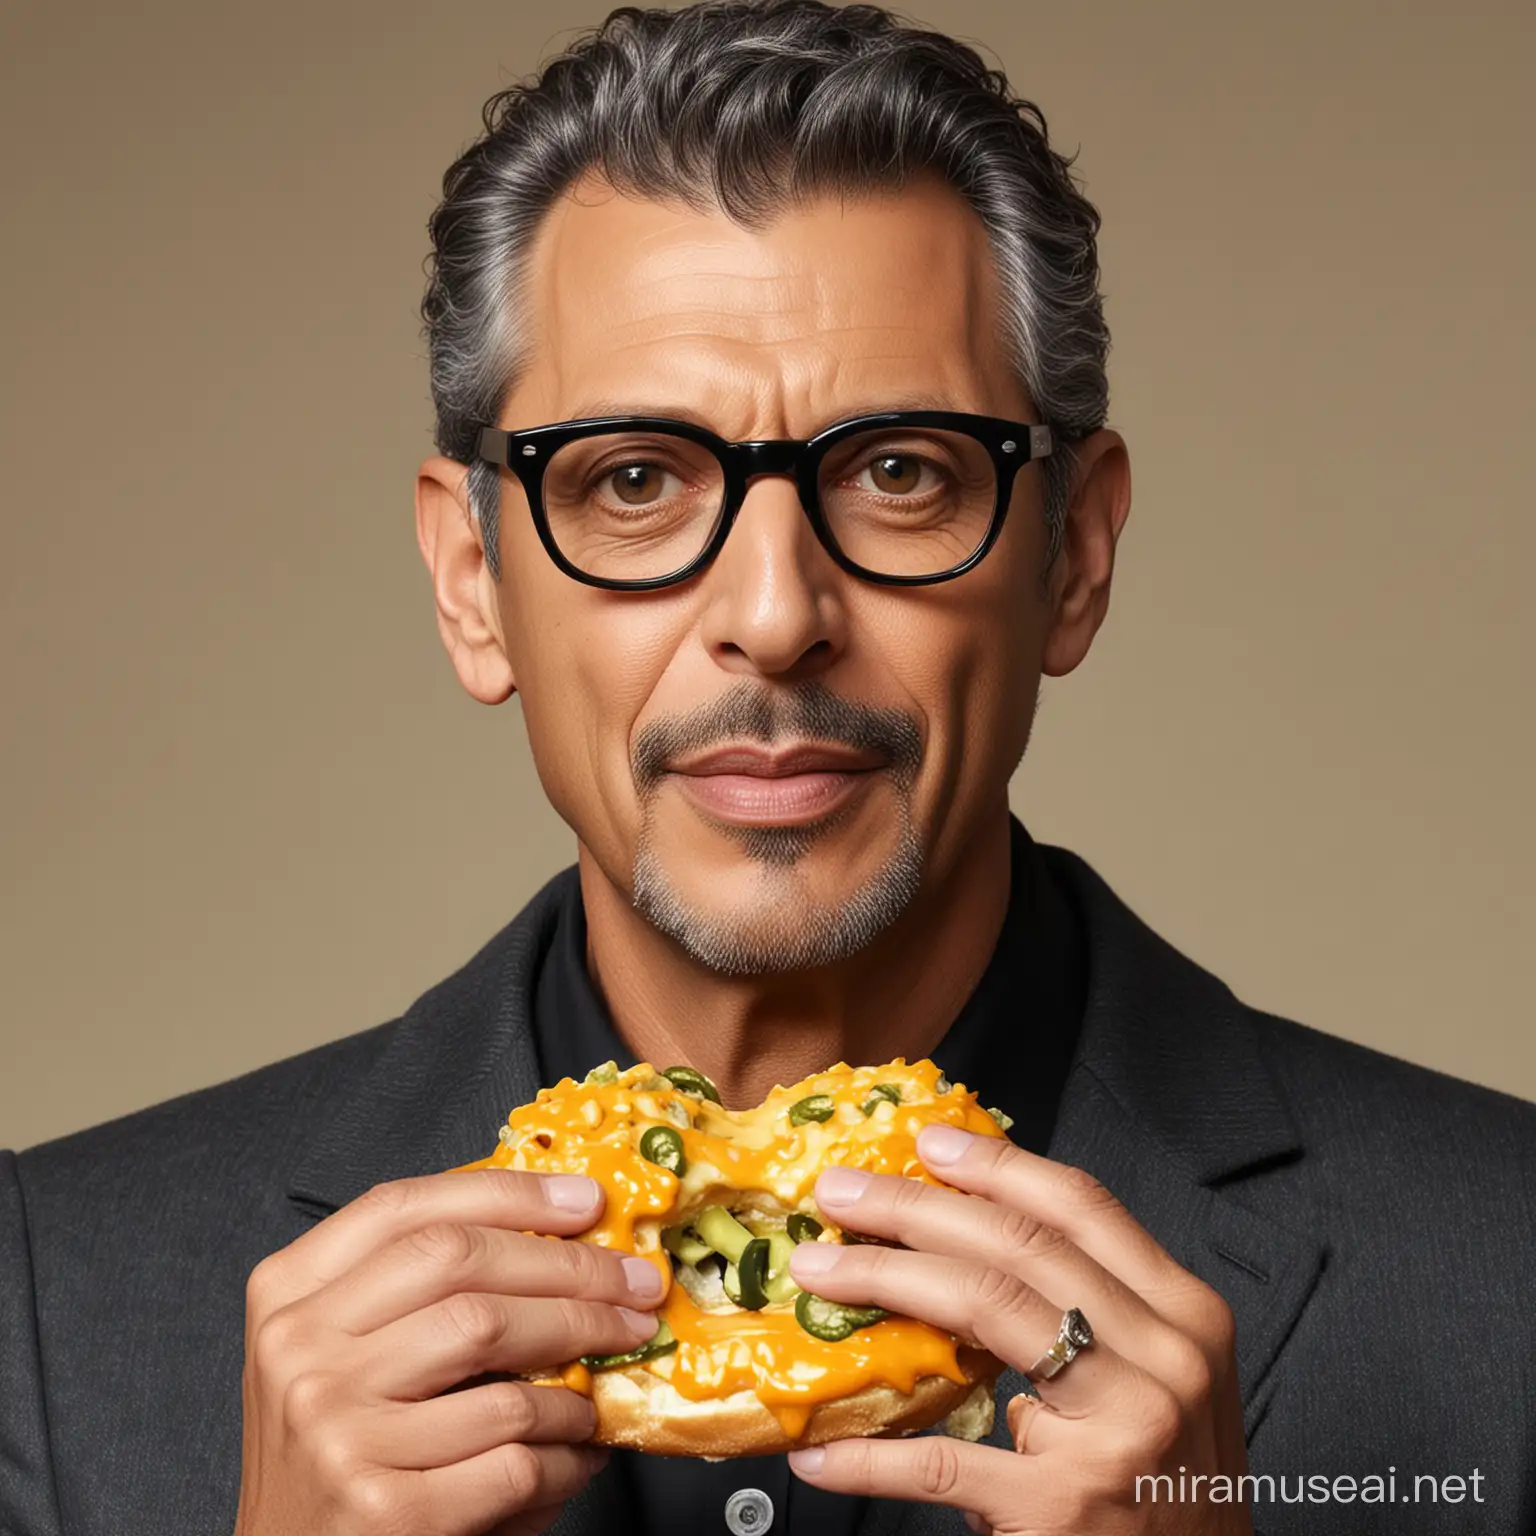 I want to see Jeff Goldblum eating a cheddar-jalapeno bagel